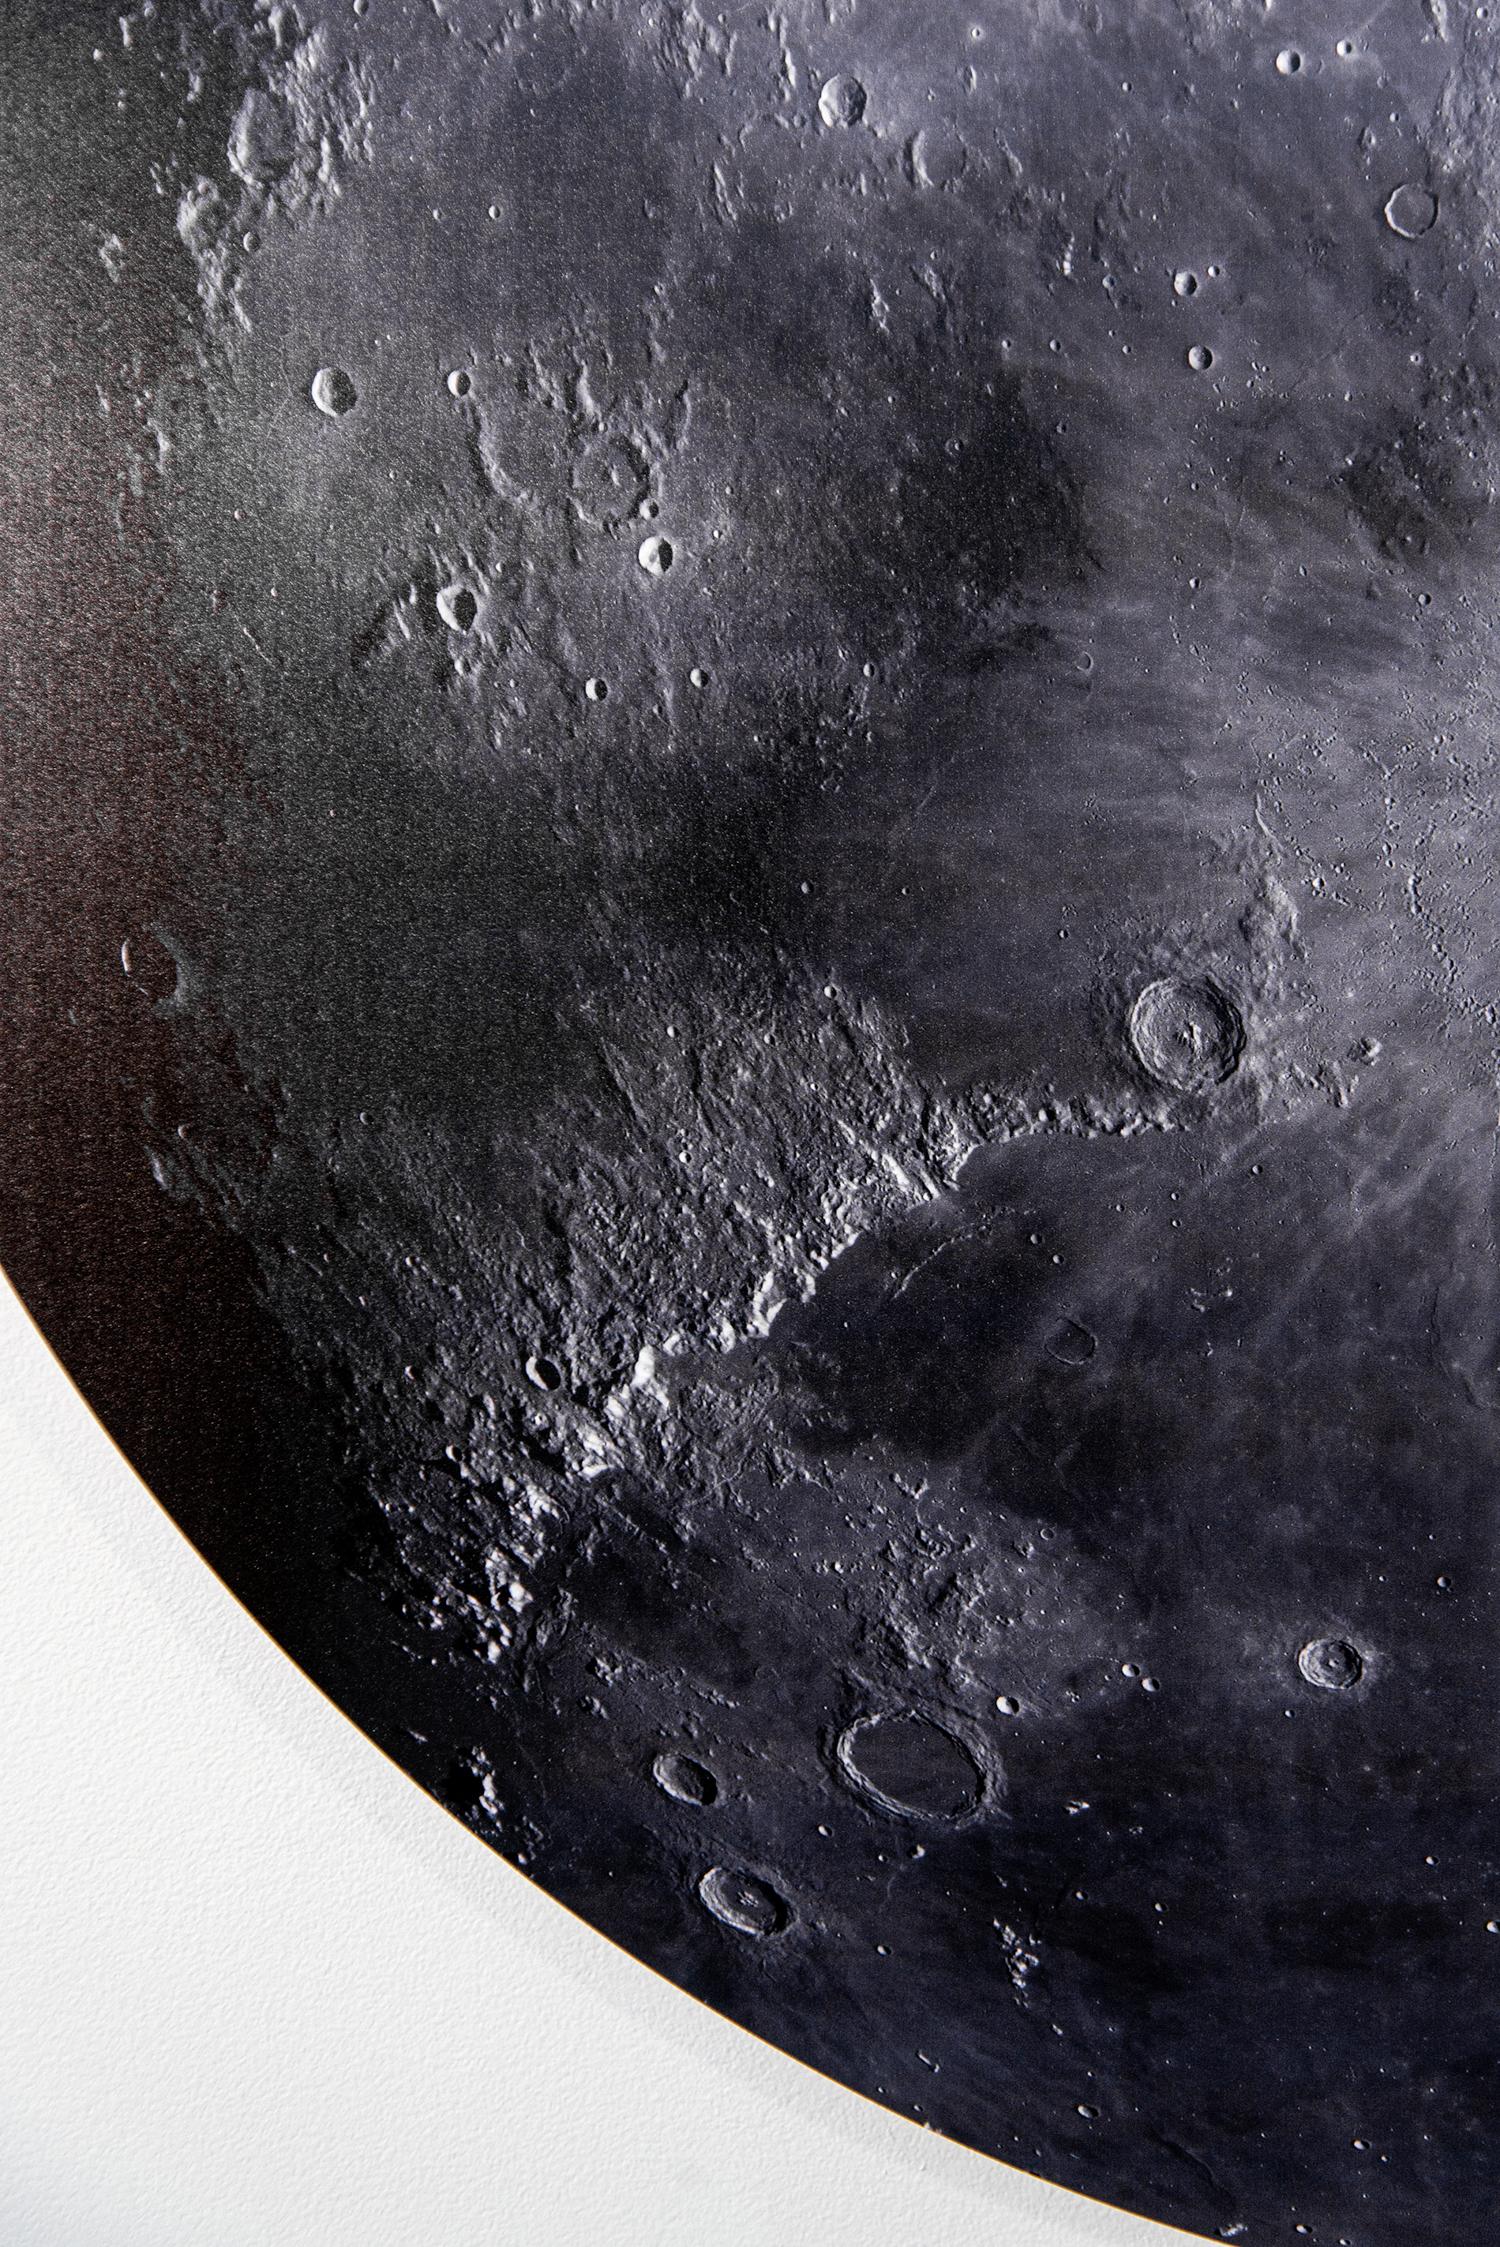 As a child, Ryan Van Der Hout owned a telescope and was fascinated by the sight of the moon in the night sky. This iconic image of the moon as viewed from earth is re-imagined when Van Der Hout folds the full colour photographic print he created.